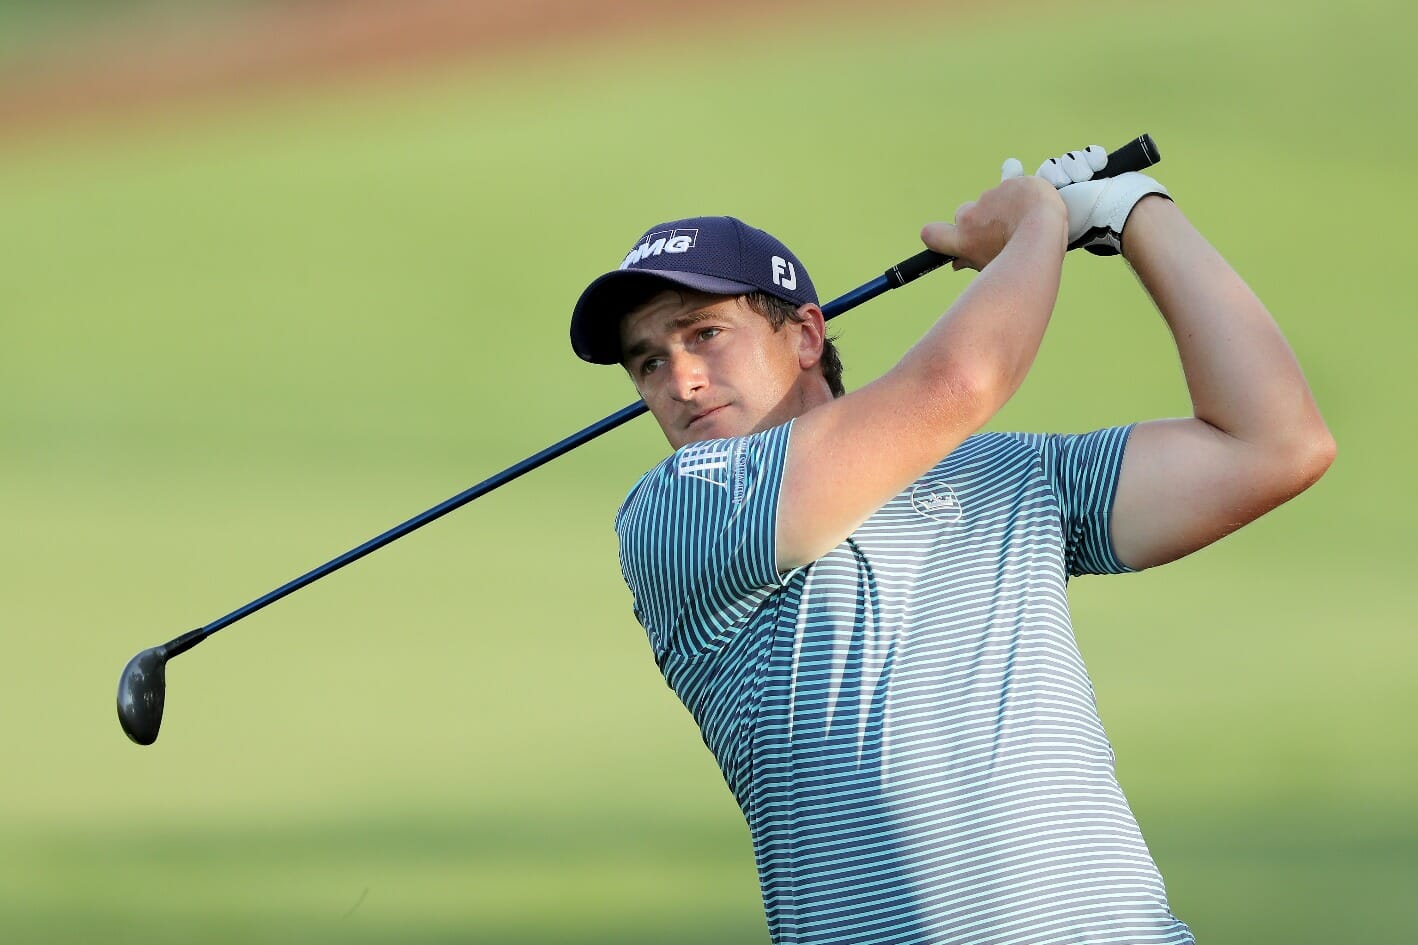 Abu Dhabi next up for Dunne after EurAsia success